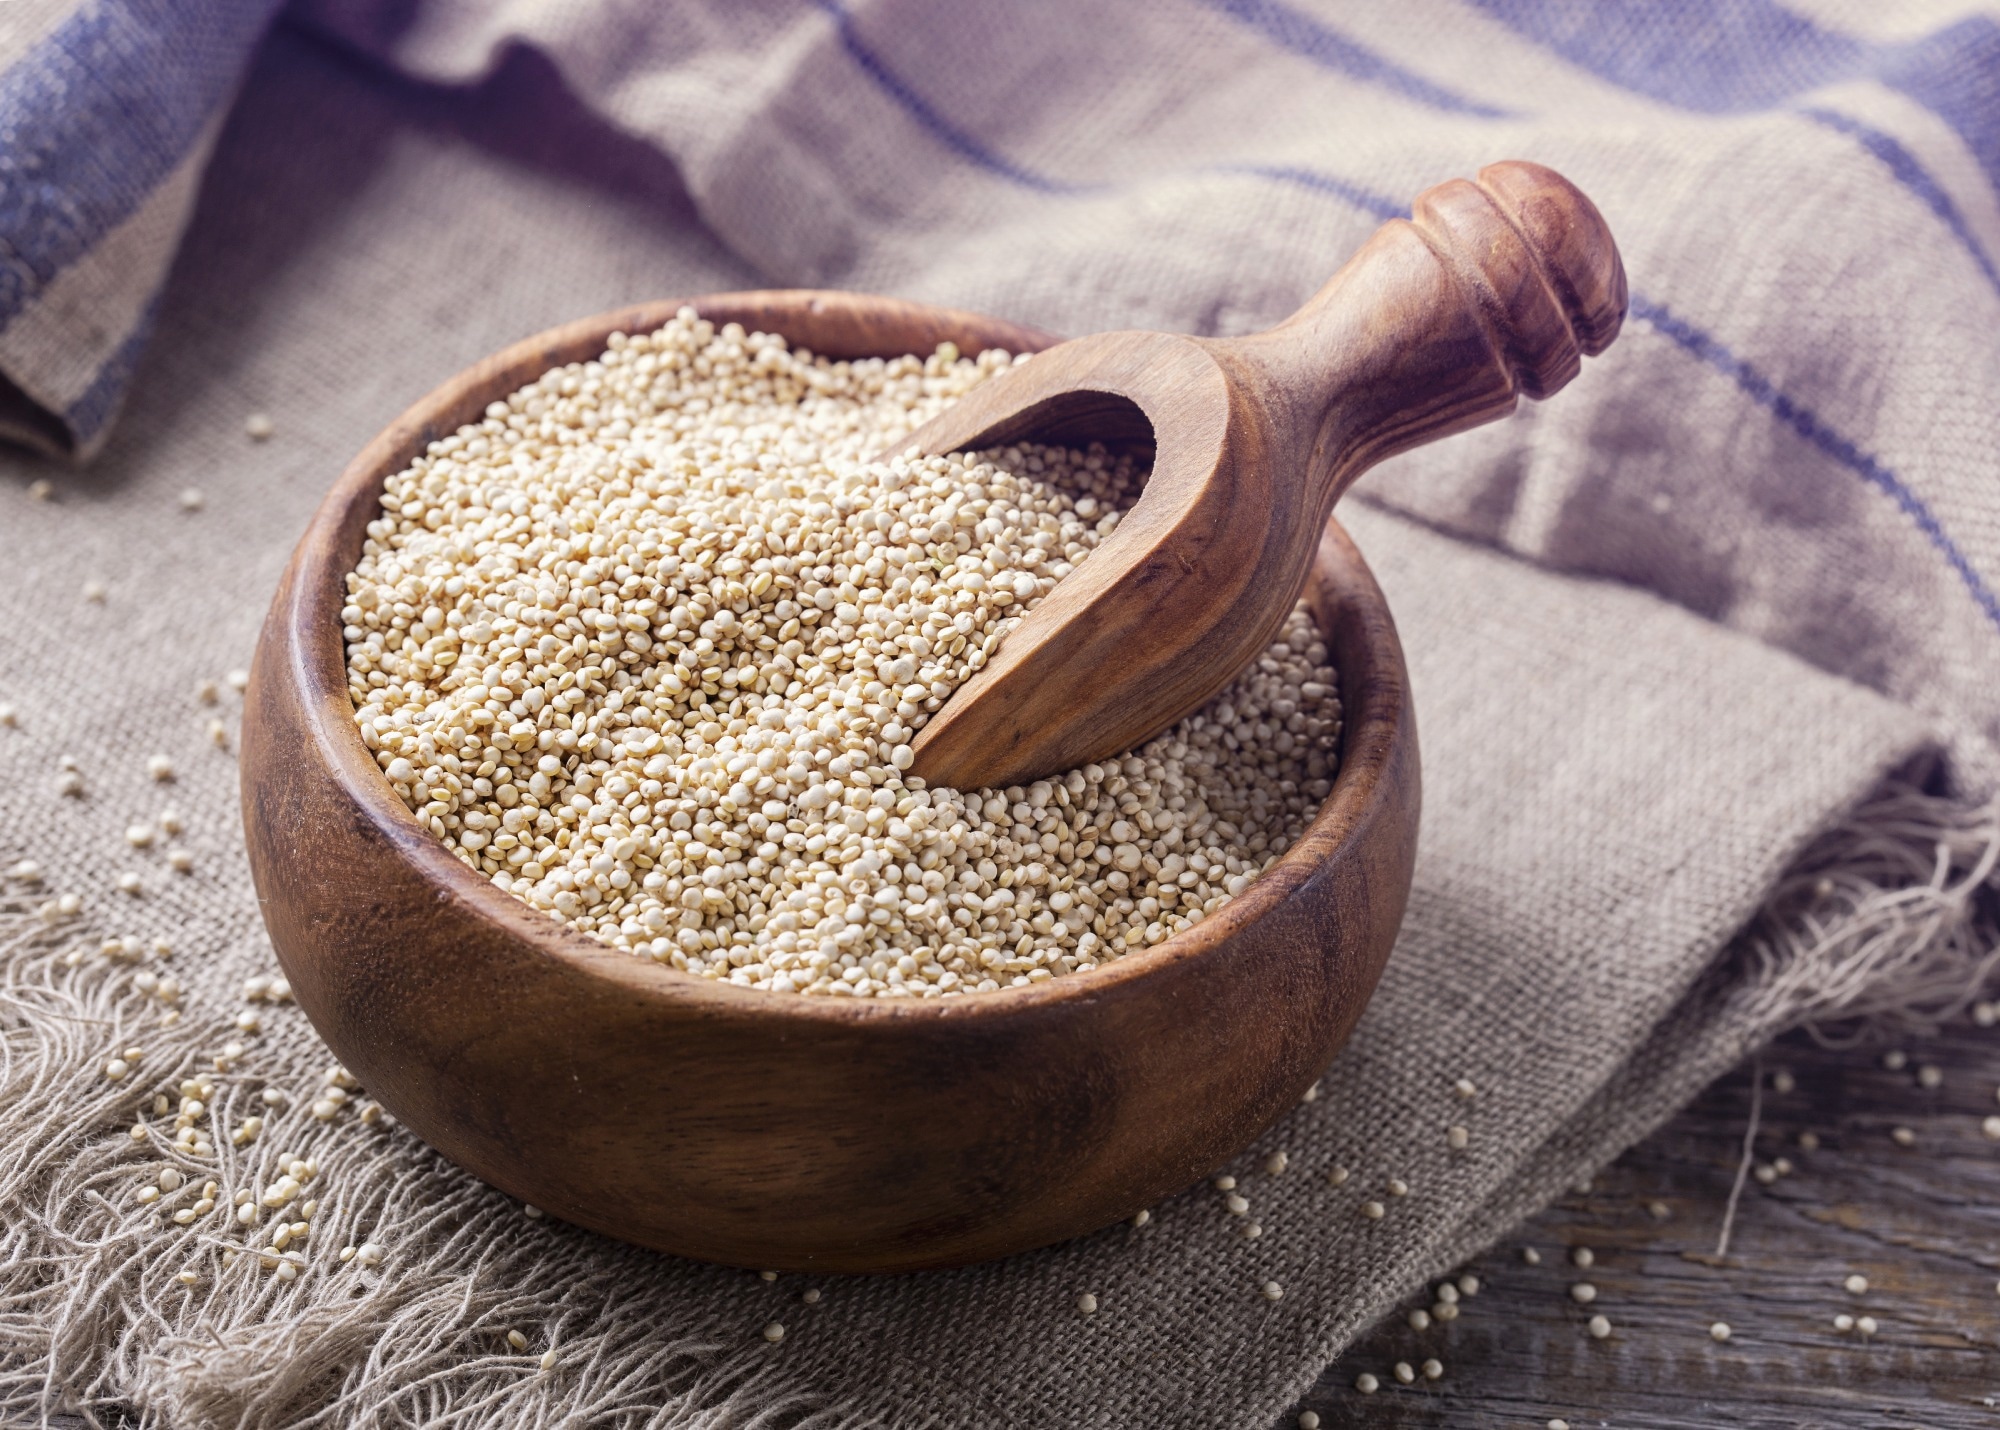 Study: Biotechnological, Nutritional, and Therapeutic Applications of Quinoa (Chenopodium quinoa Willd.) and Its By-Products: A Review of the Past Five-Year Findings. Image Credit: Elena Schweitzer/Shutterstock.com